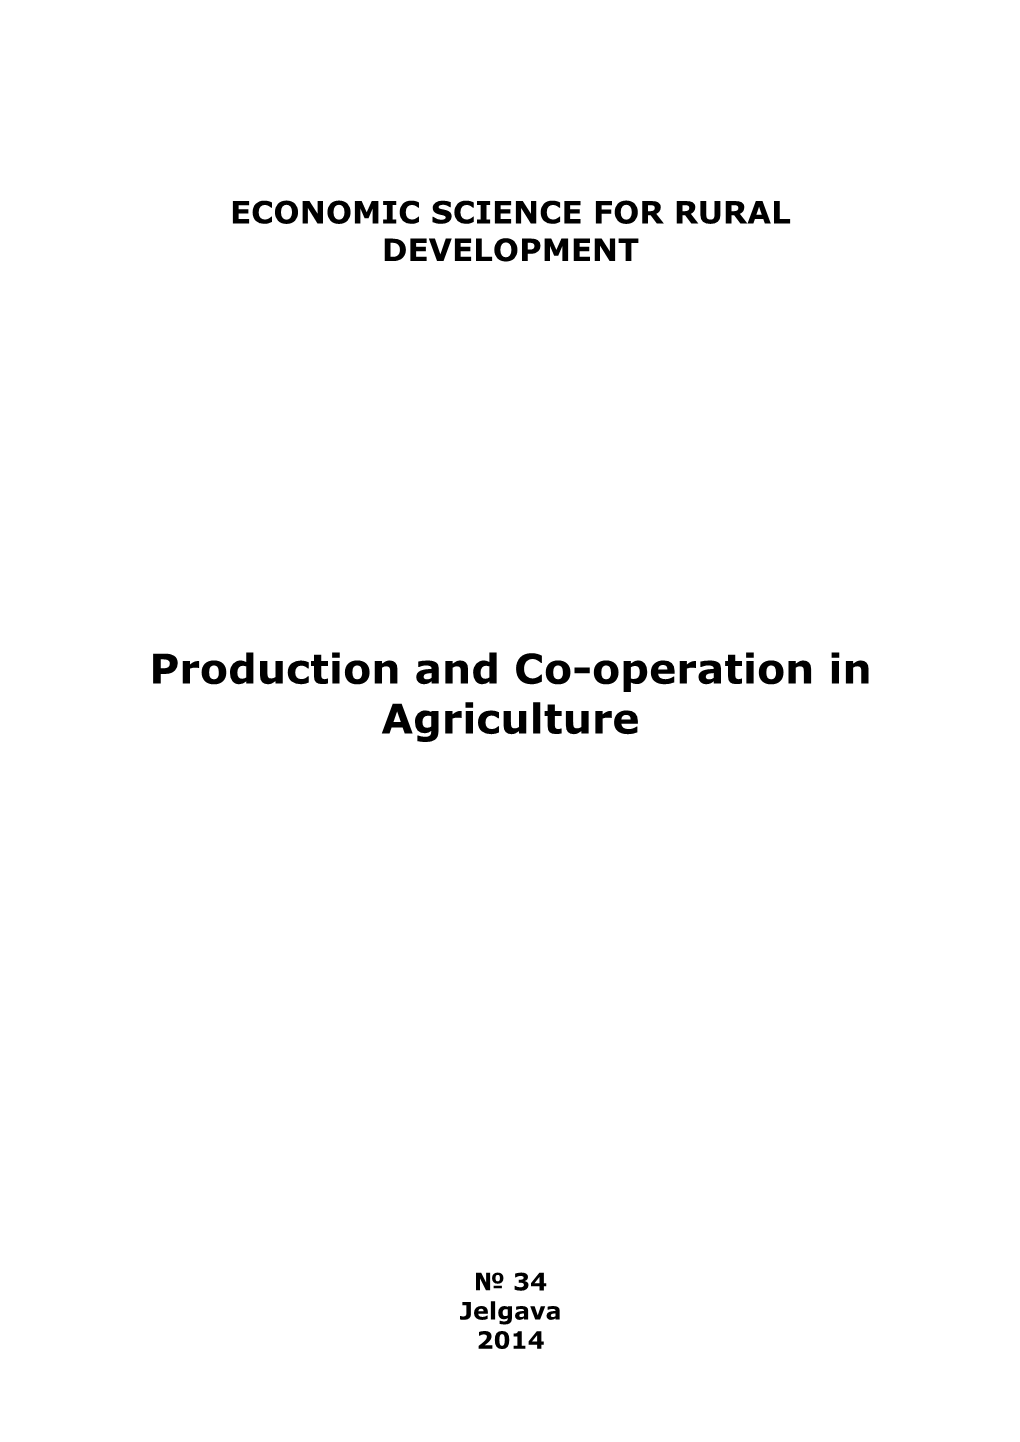 Production and Co-Operation in Agriculture